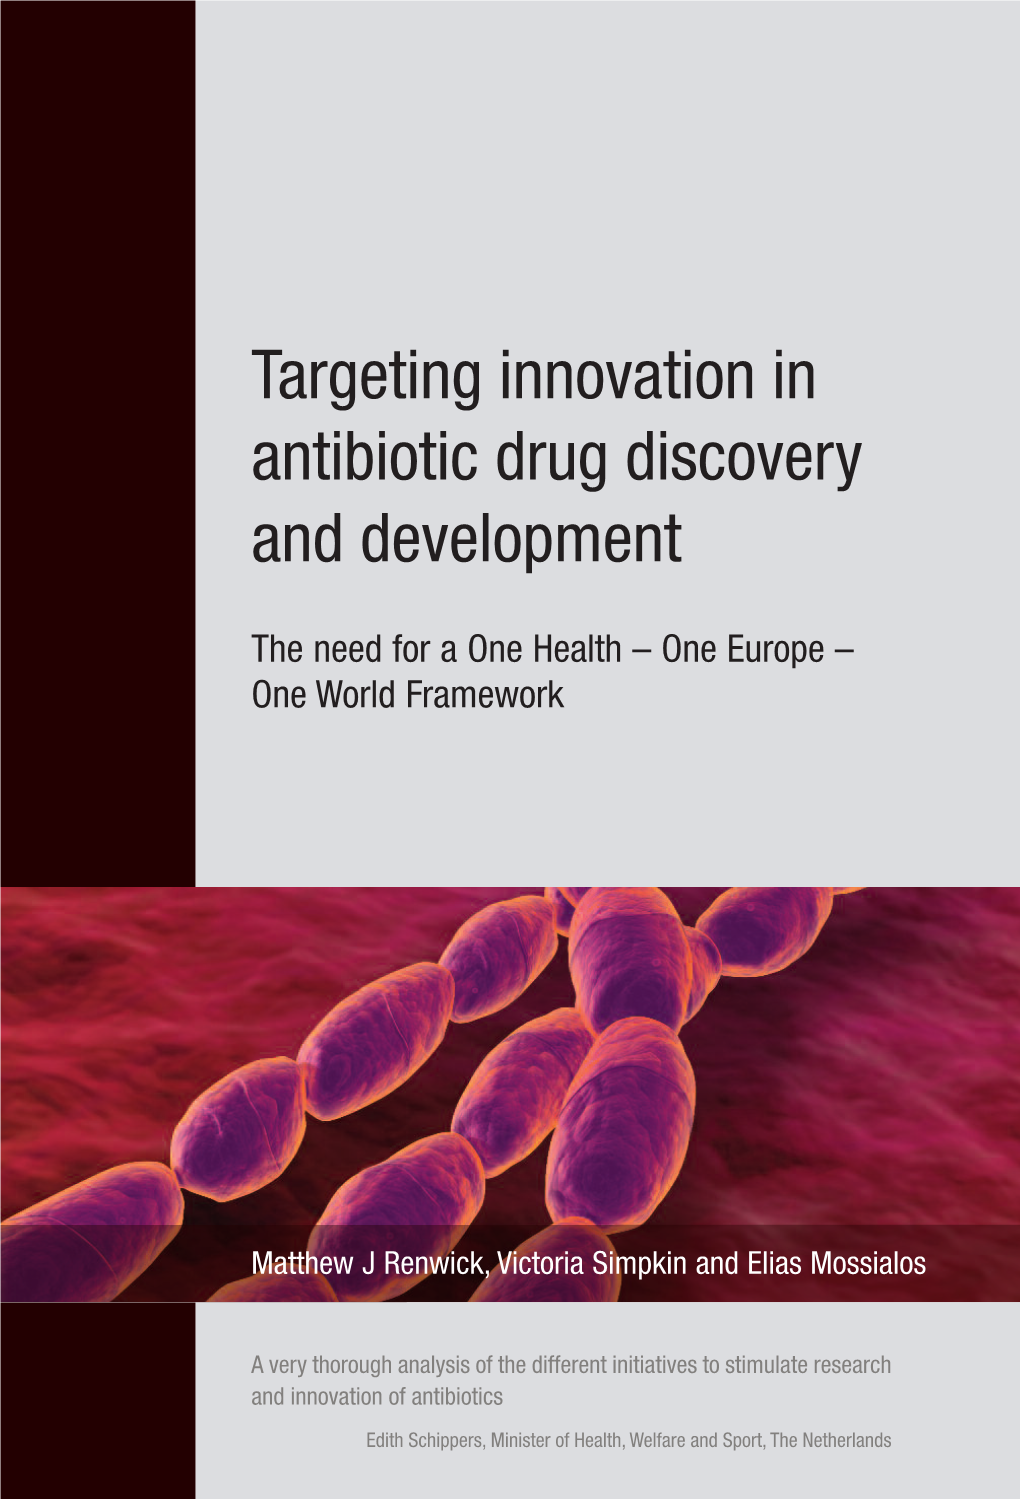 Targeting Innovation in Antibiotic Drug Discovery and Development (2016)